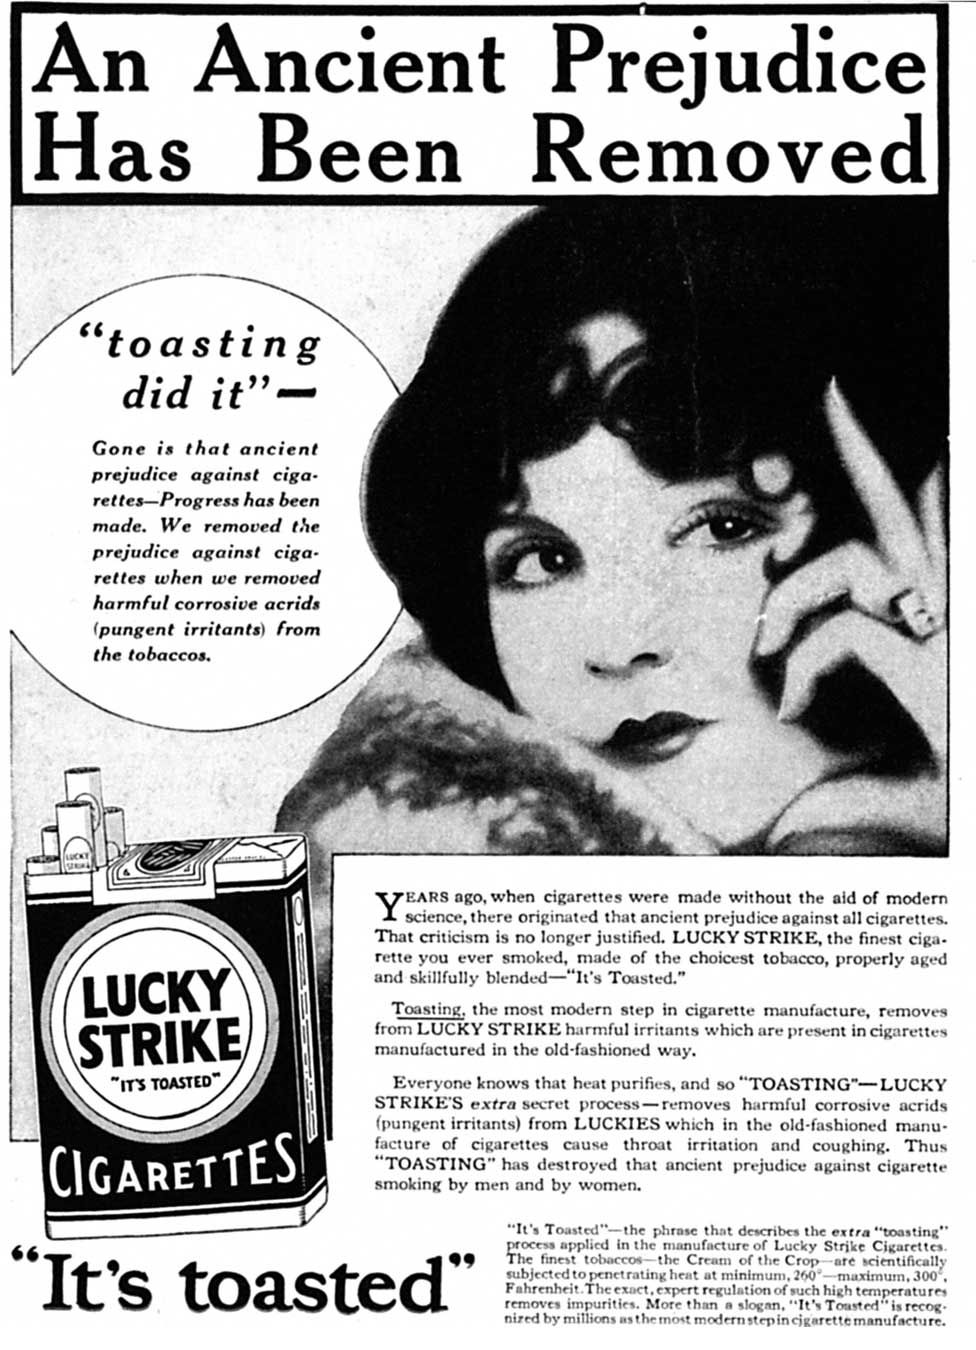 An advert for Lucky Strike cigarettes